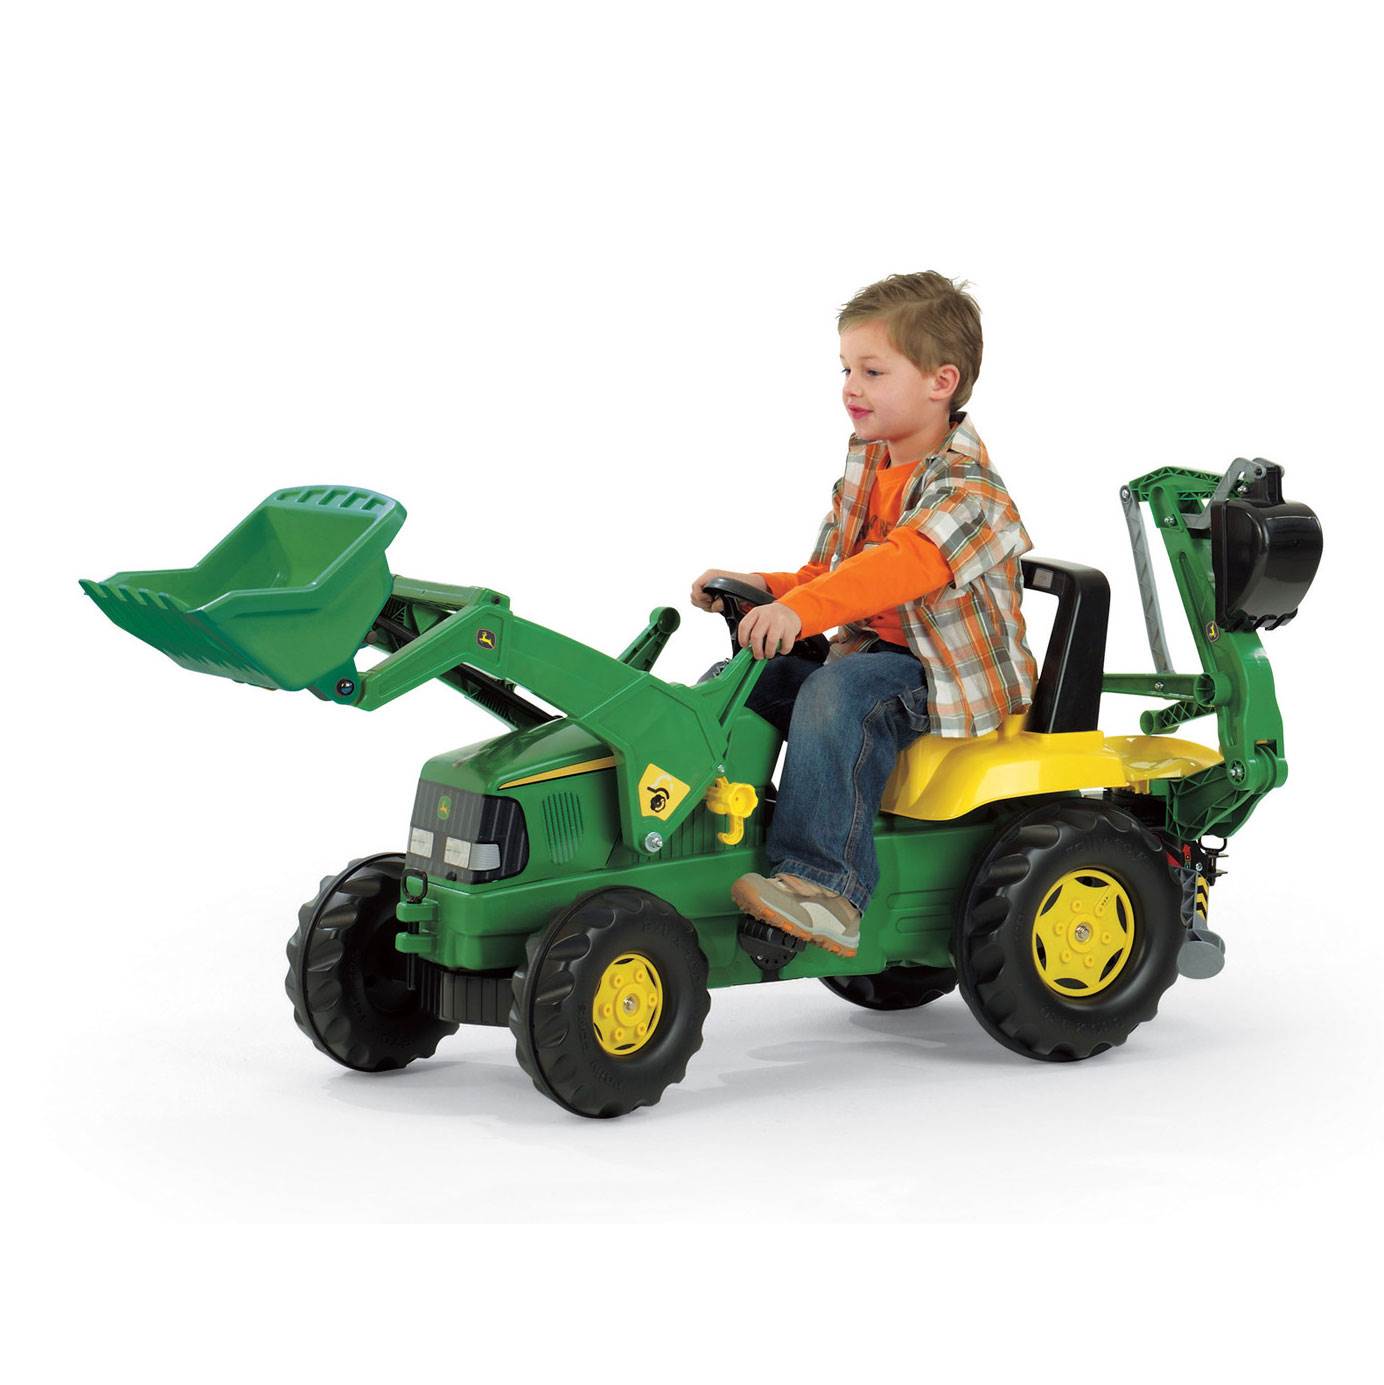 Rolly Toys John Deere Ride On Pedal Powered Tractor Loader with Working Backhoe - image 1 of 2